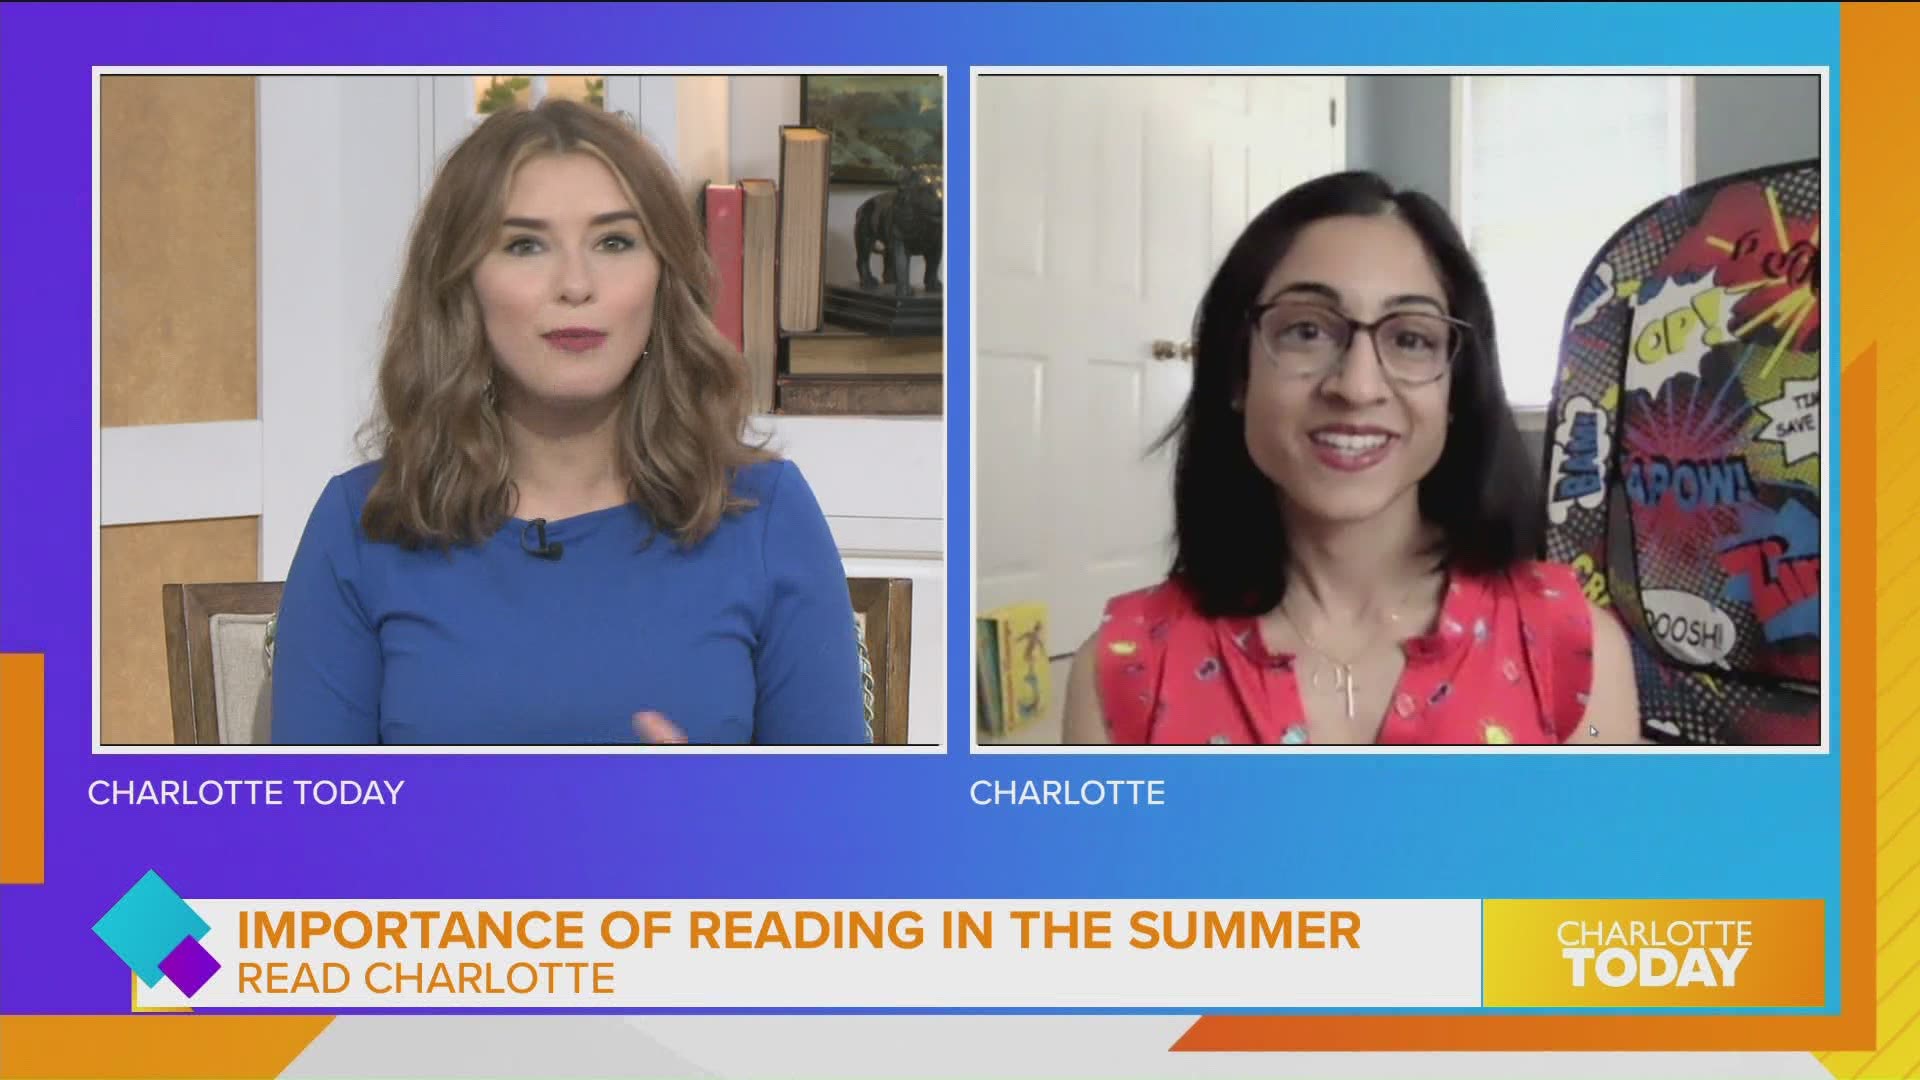 Read Charlotte has a reading check up so your kids are reading all summer while they're out of school.